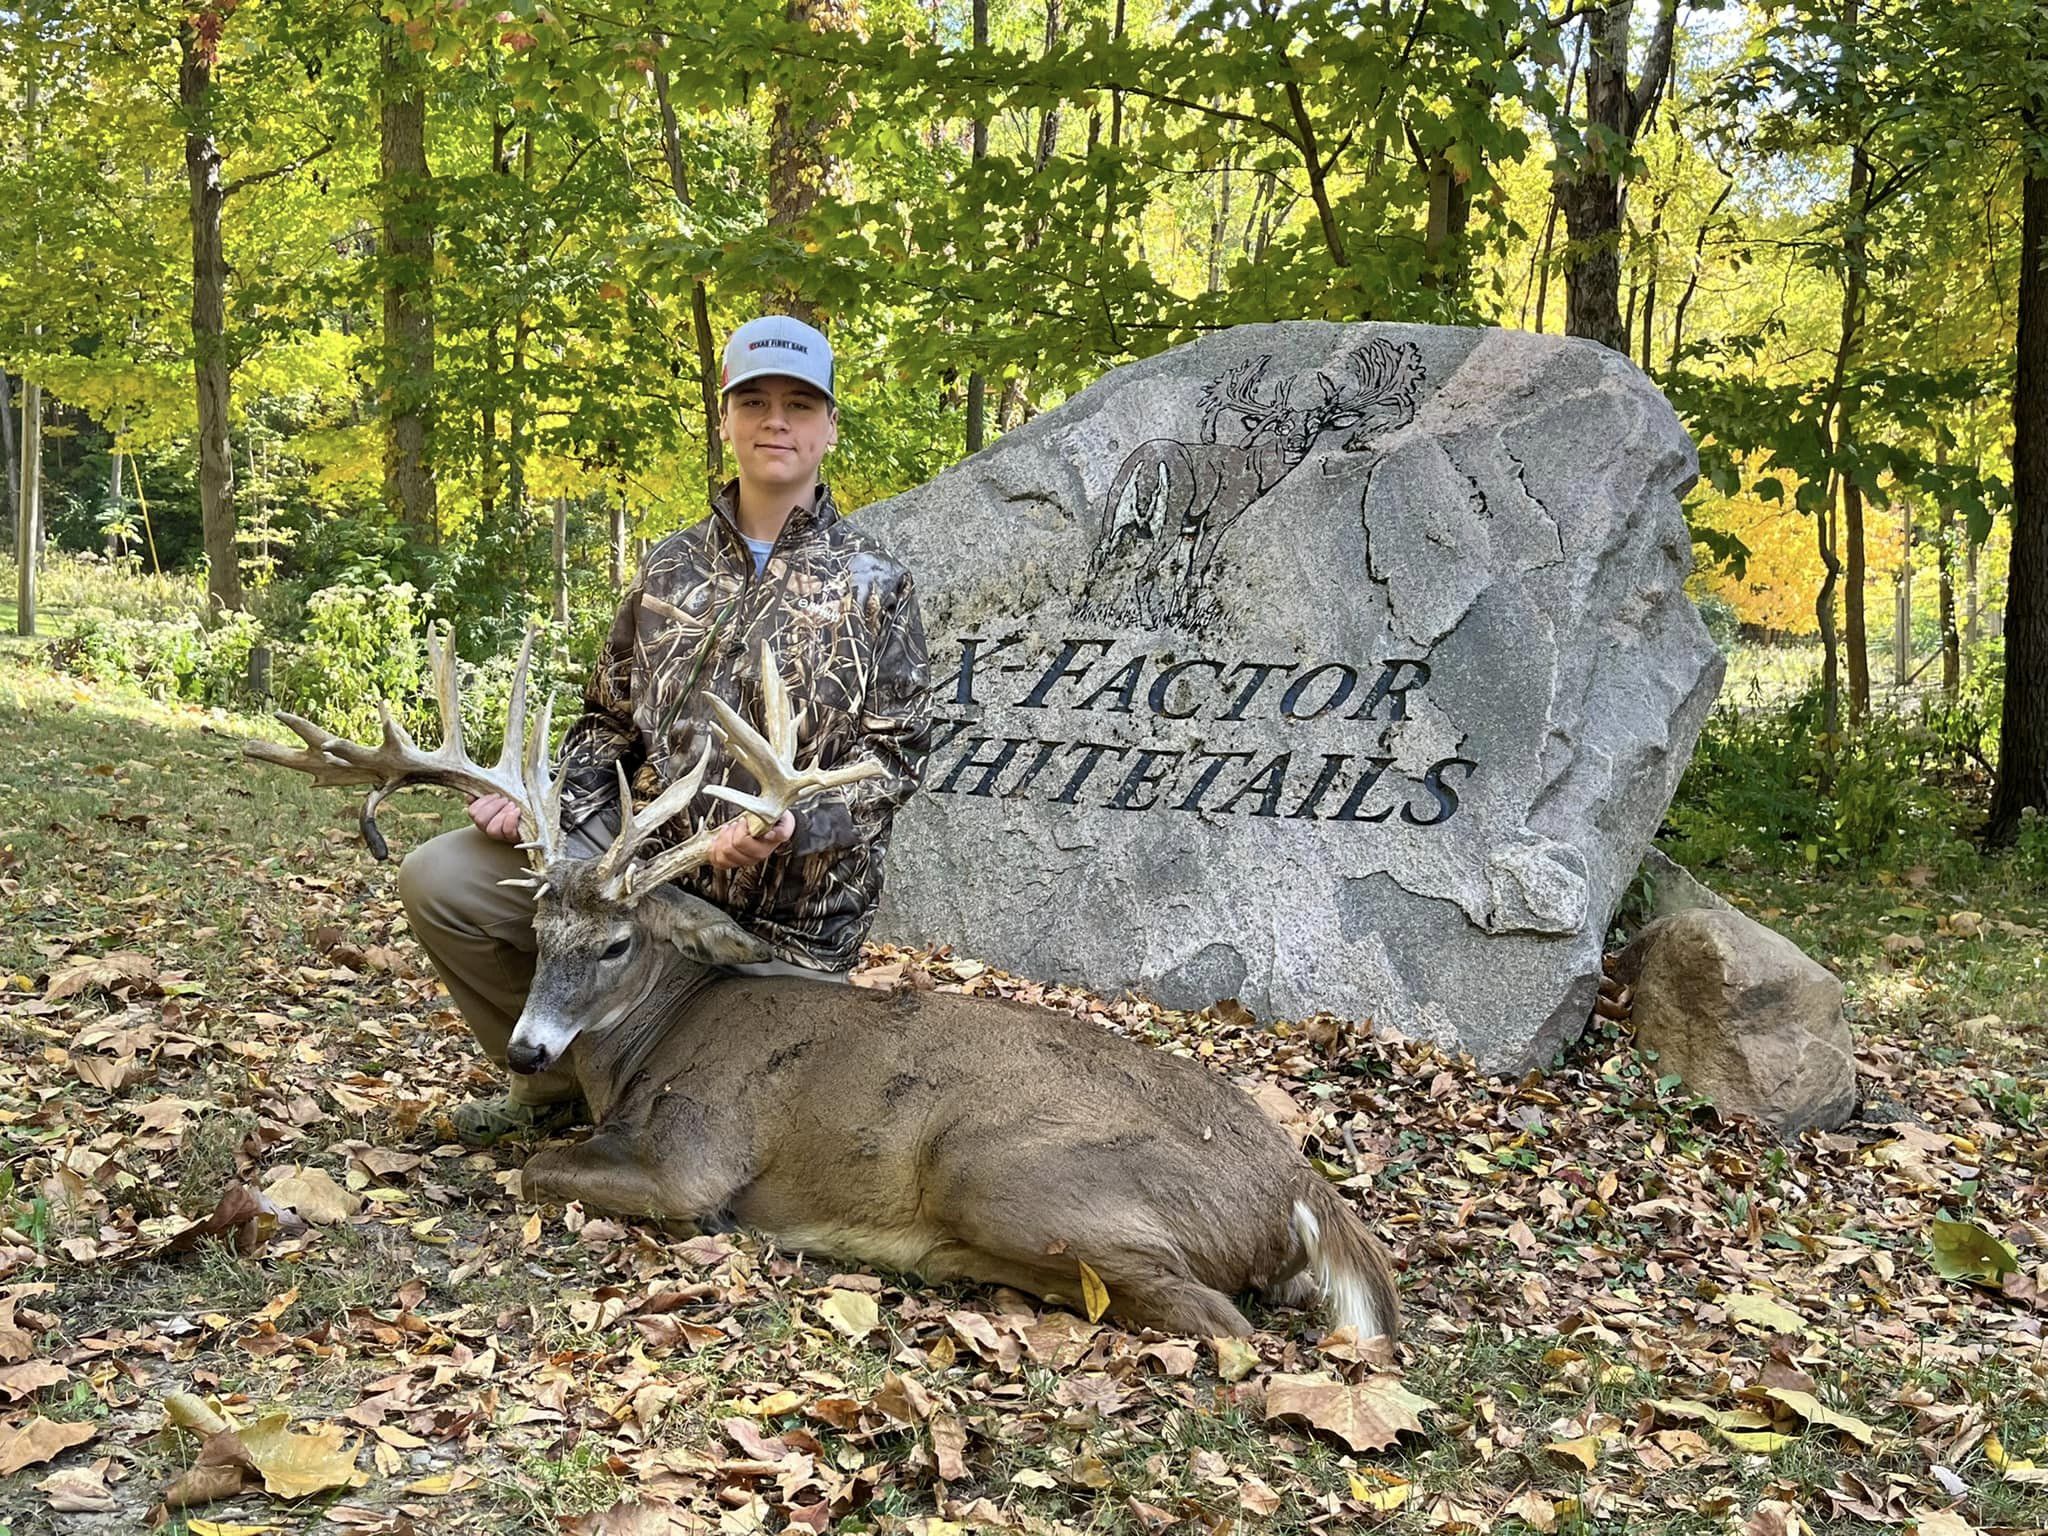 X Factor Whitetails Of Ohio - Guided Whitetail Trophy Hunt - Russ Bellar